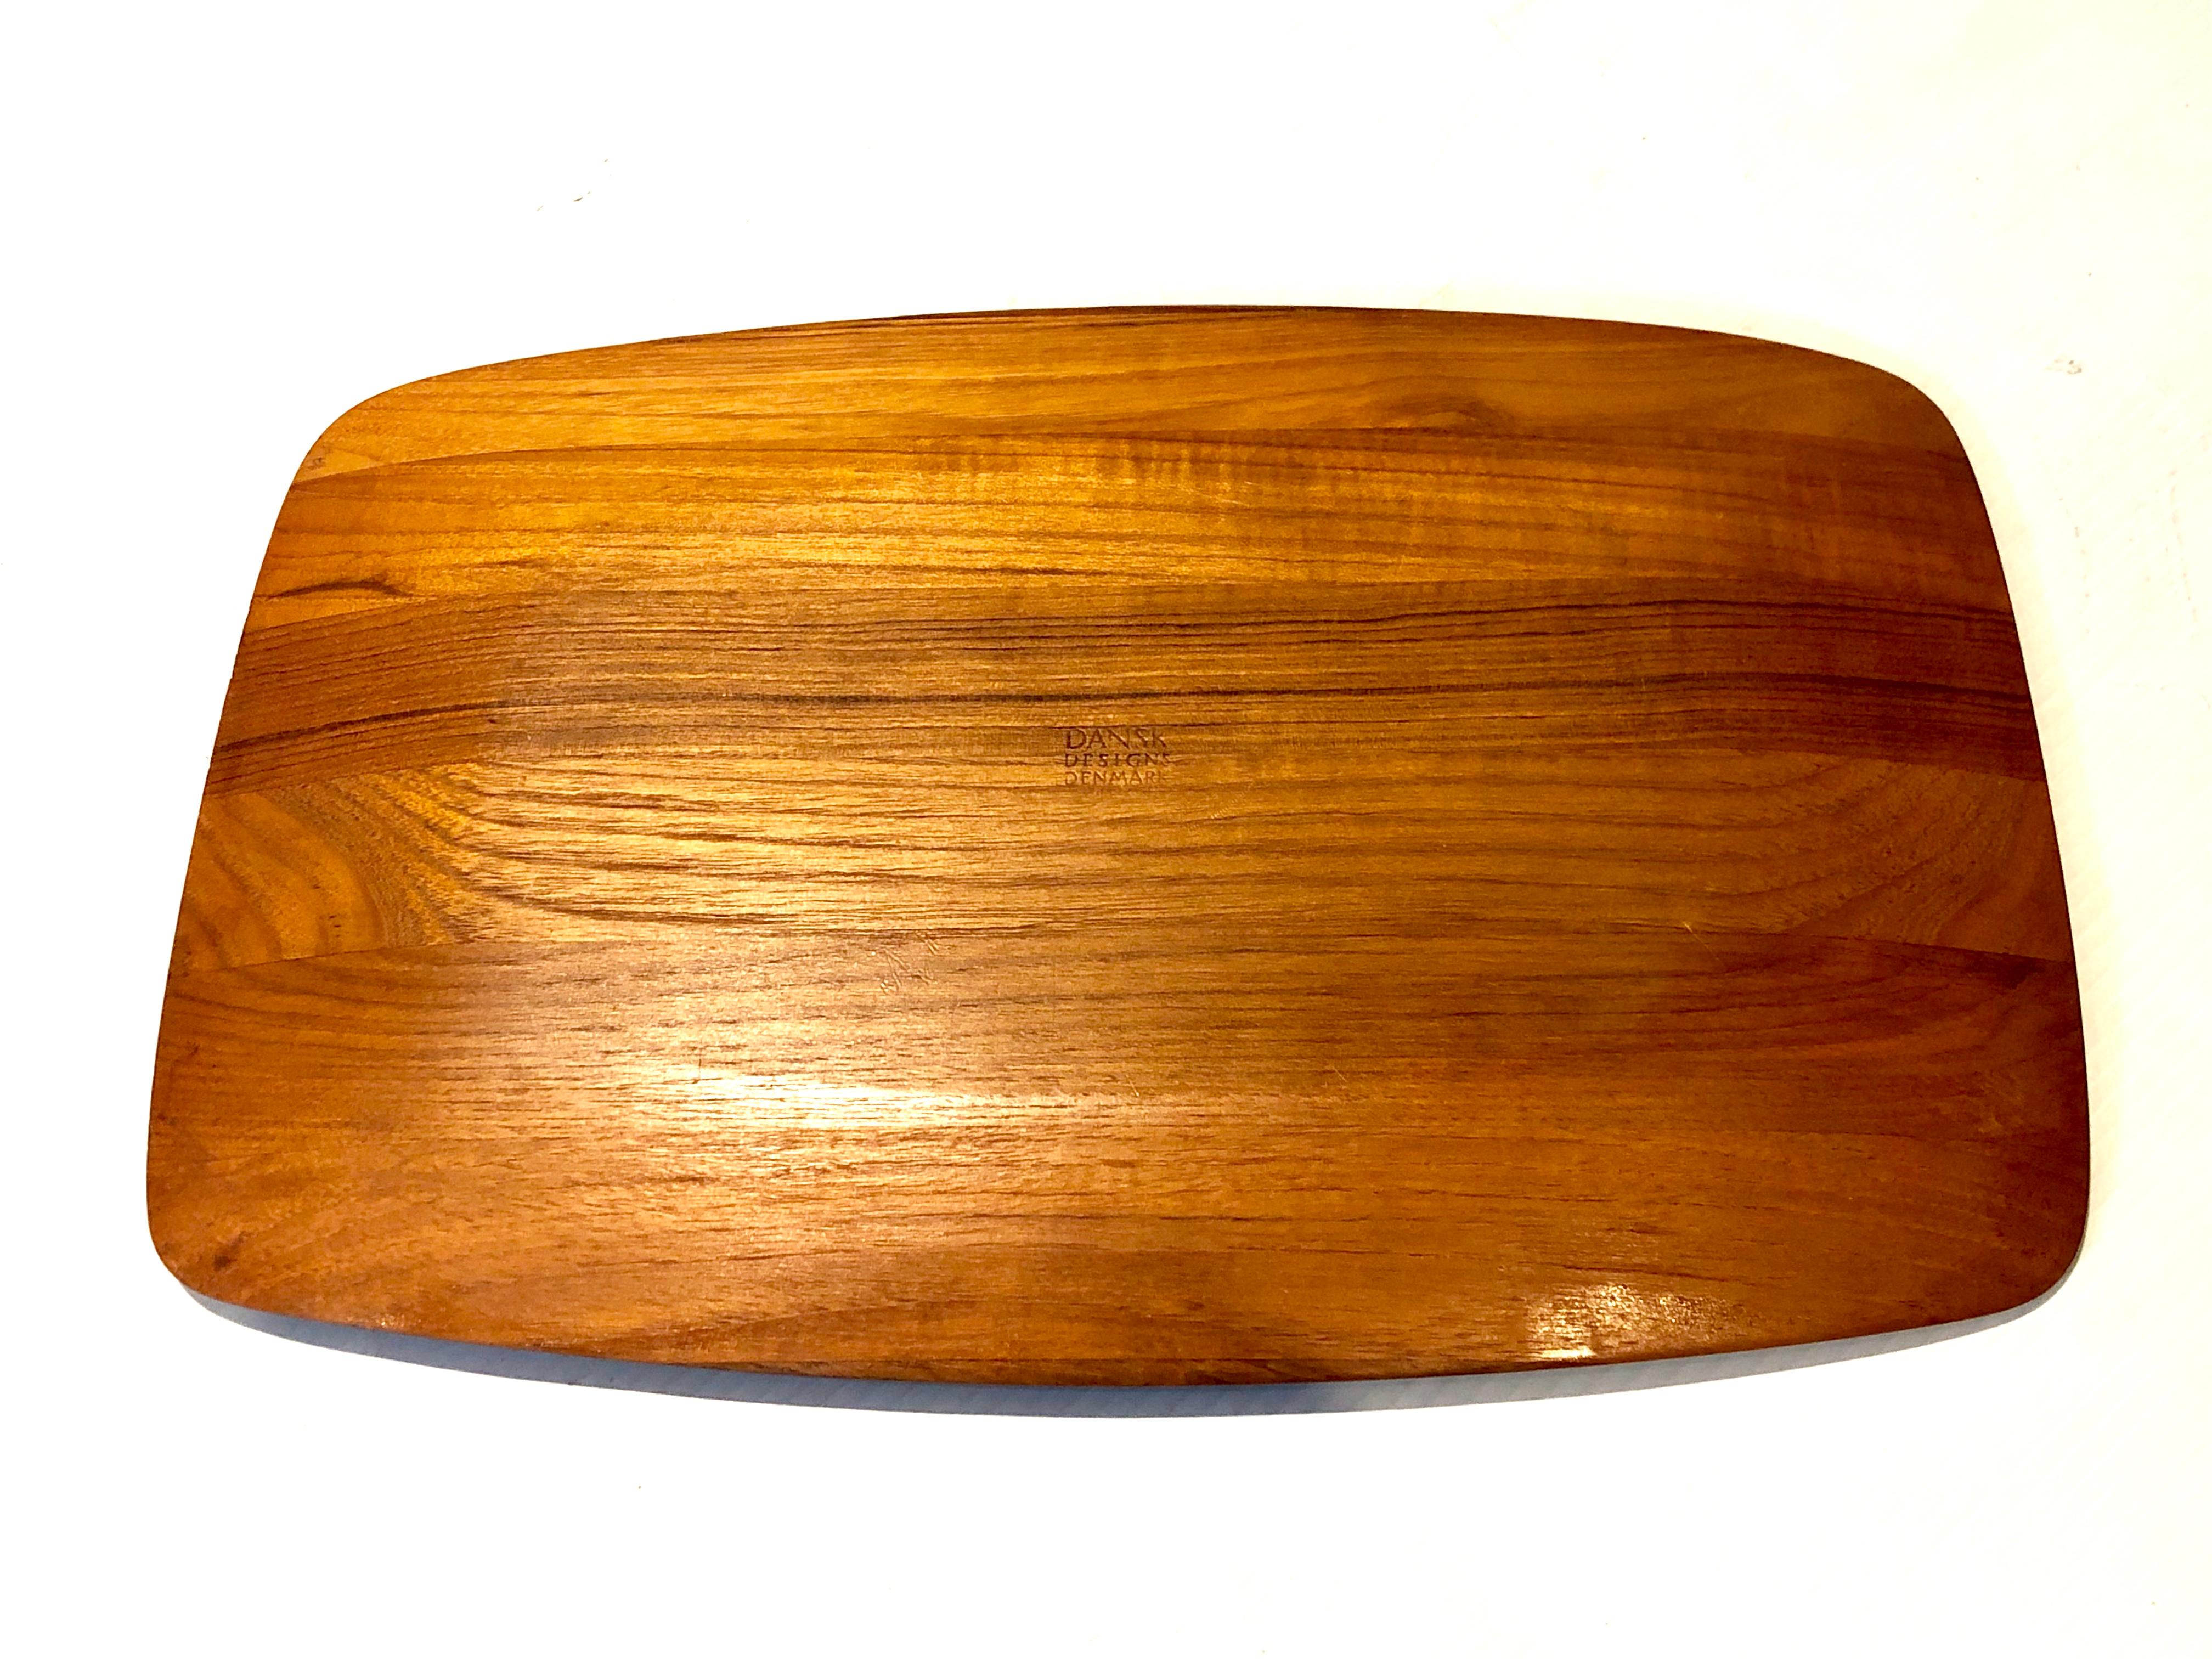 Great design on this solid teak tray designed by Quistgaard for Dansk, circa 1950s raised edge , and butcher block center great condition. Early production Made in Denmark.